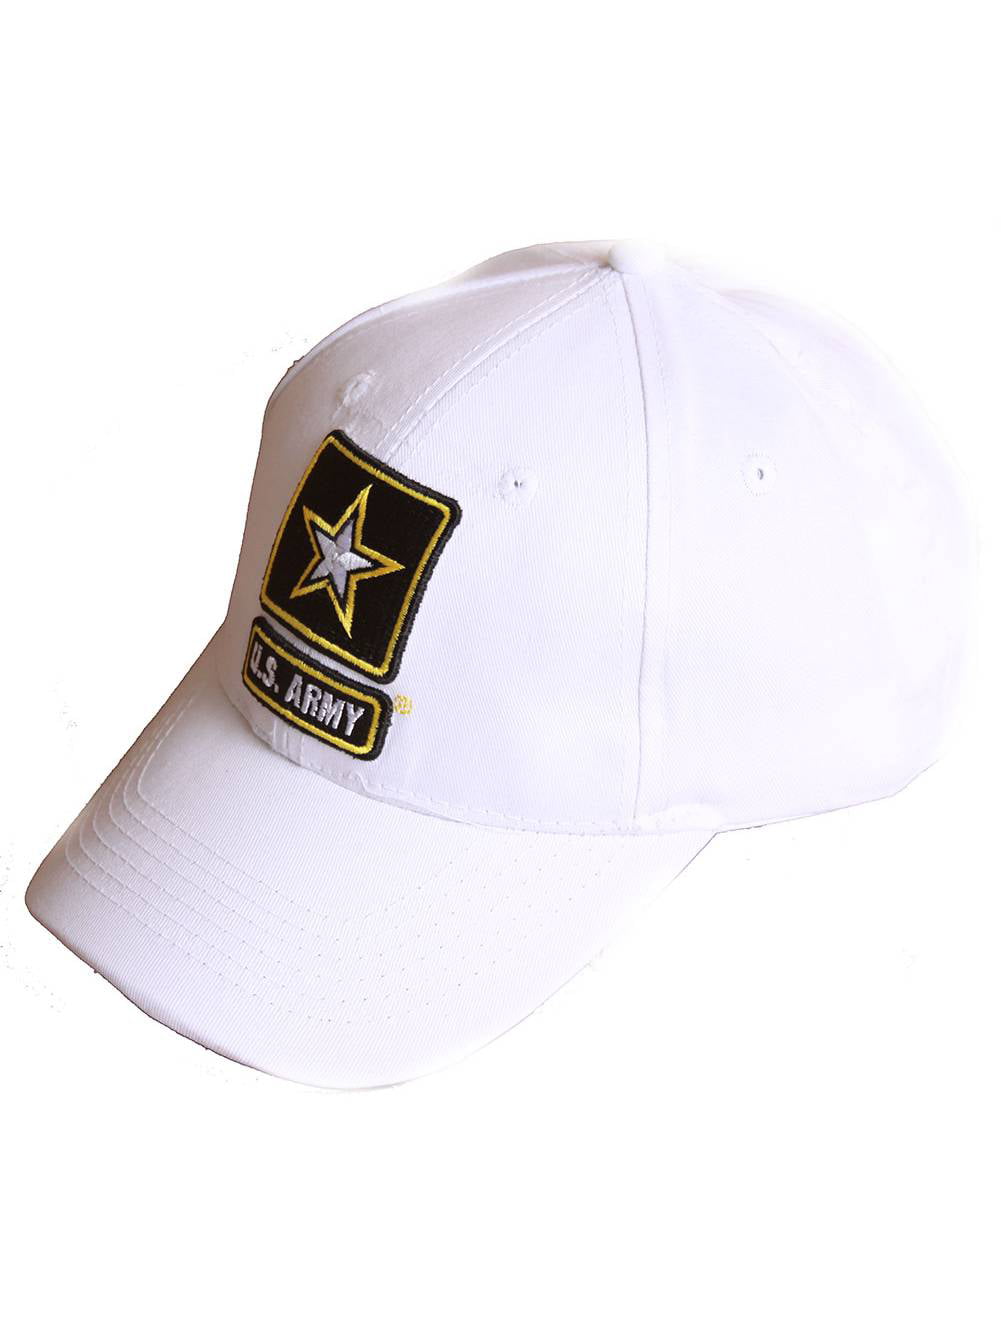 United States ARMY Baseball Officially Licensed 